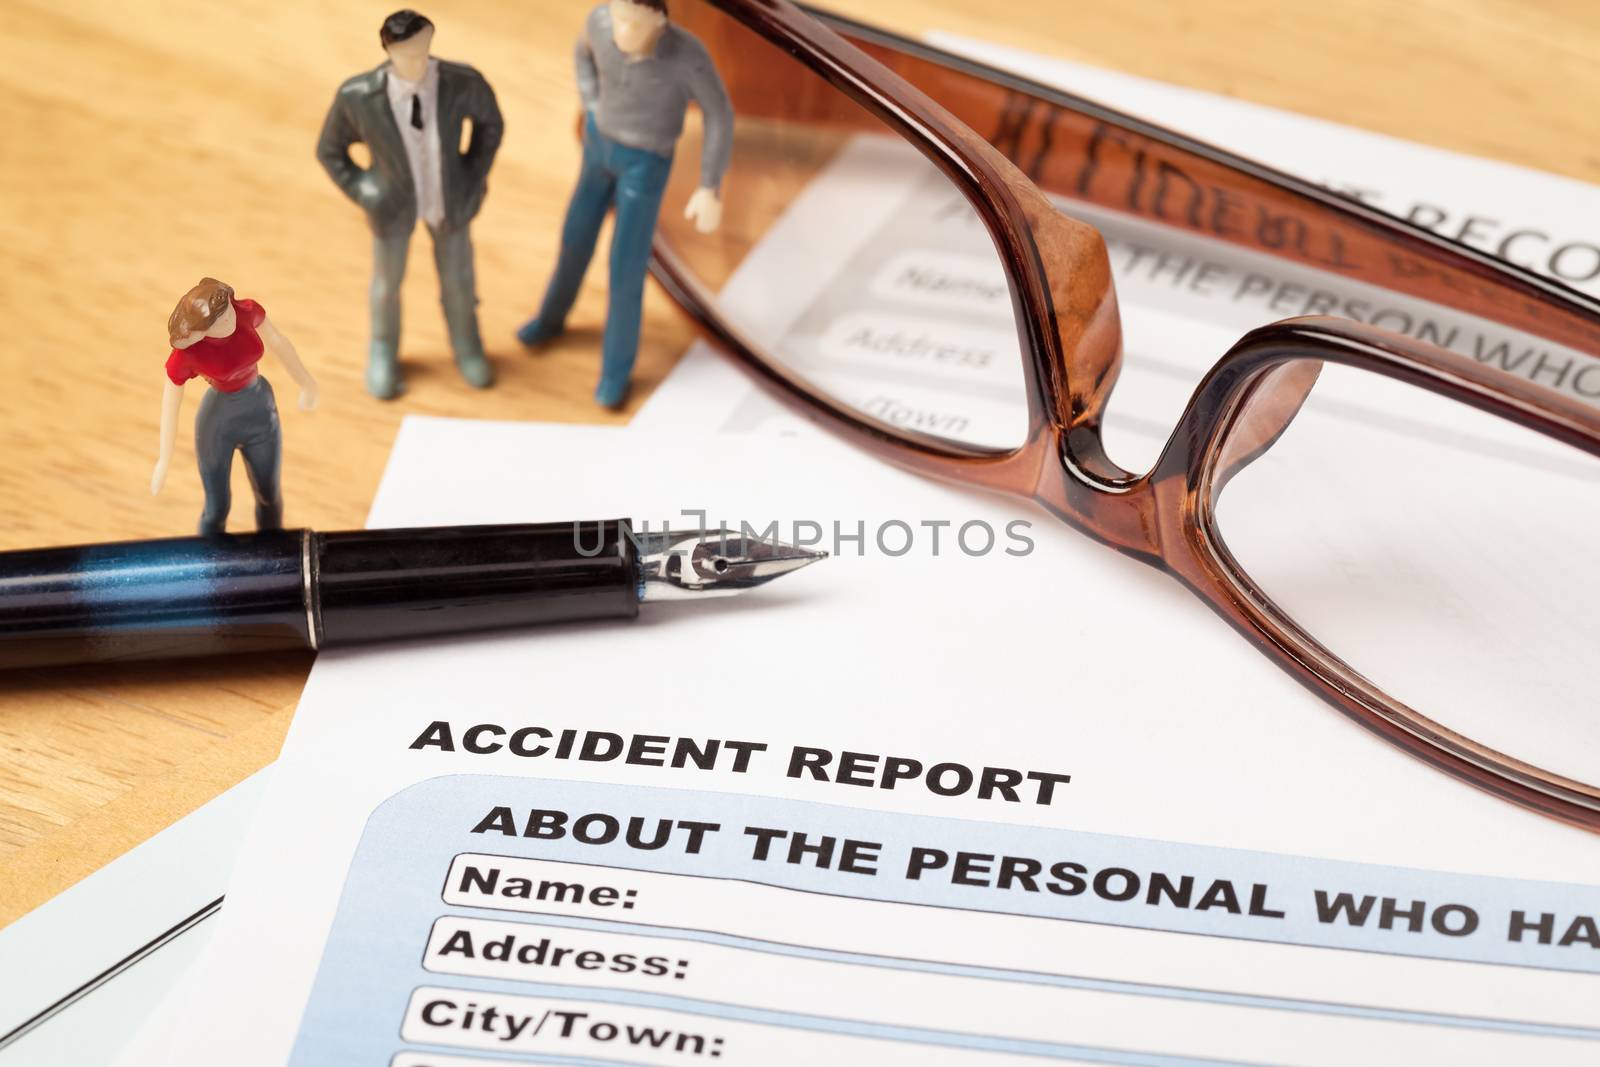 Accident report application form and pen on brown envelope and eyeglass, business insurance and risk concept; document is mock-up